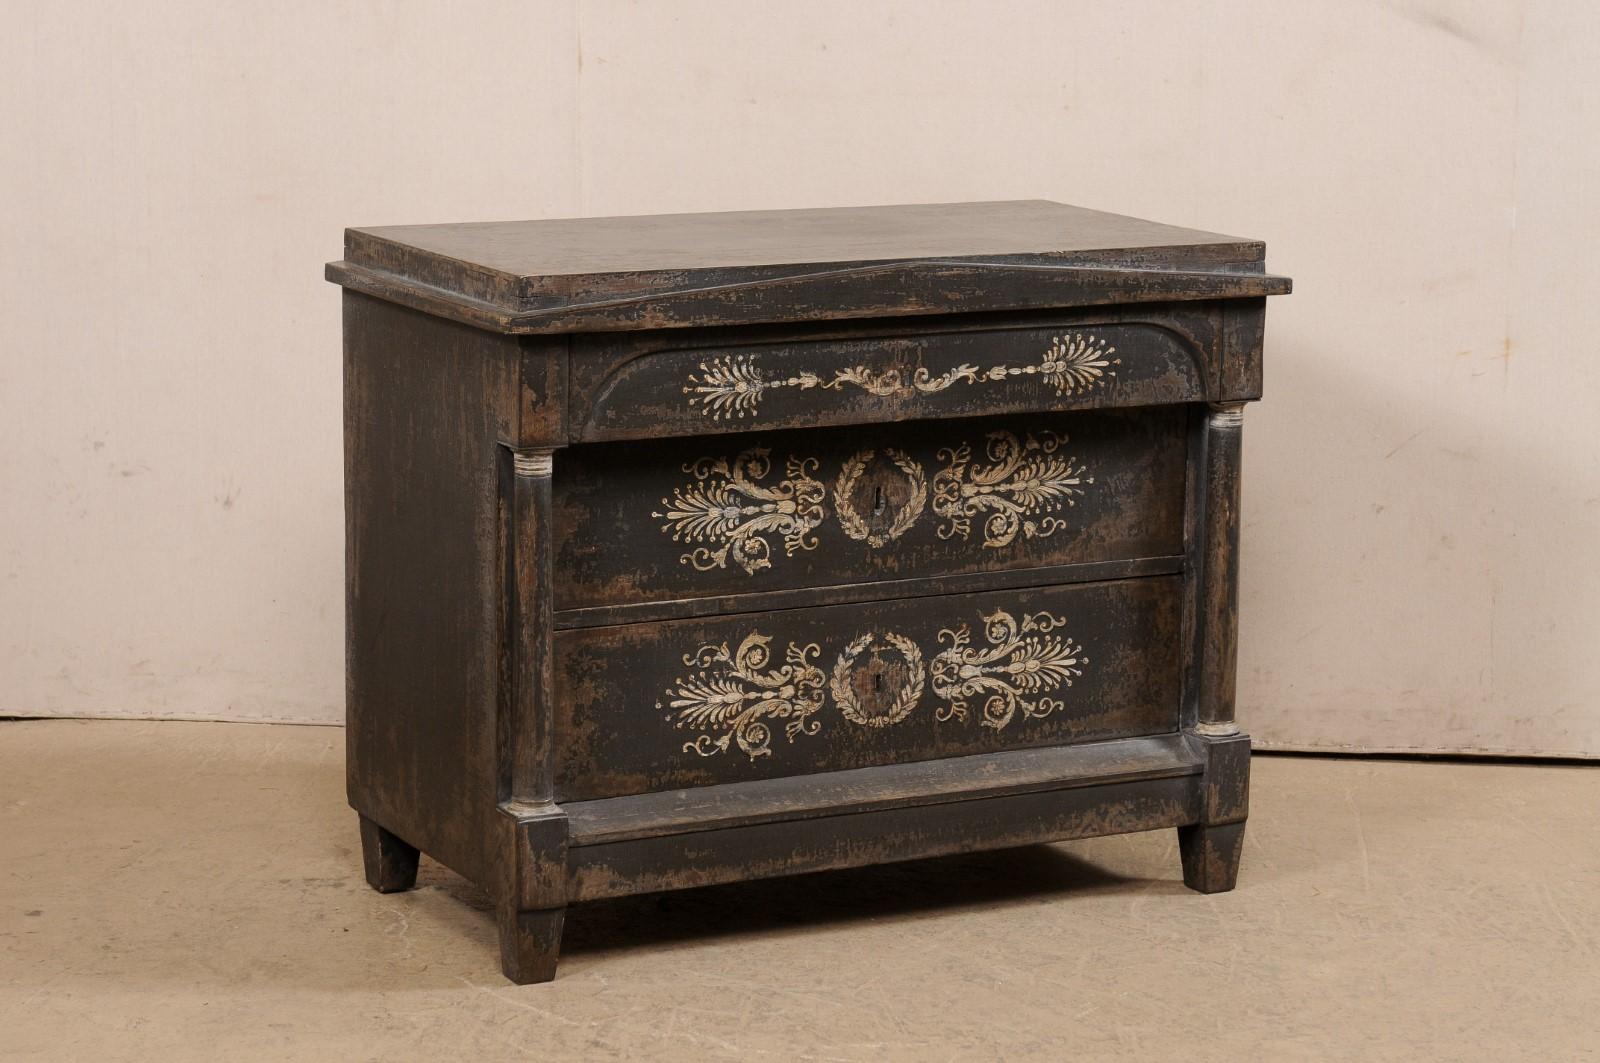 A French Empire commode, with an artisan hand-painted finish, from the 19th century. This antique chest from France has a rectangular-shaped top, which is slightly recessed upon a lower perimeter lip, and front has a pediment-style triangular